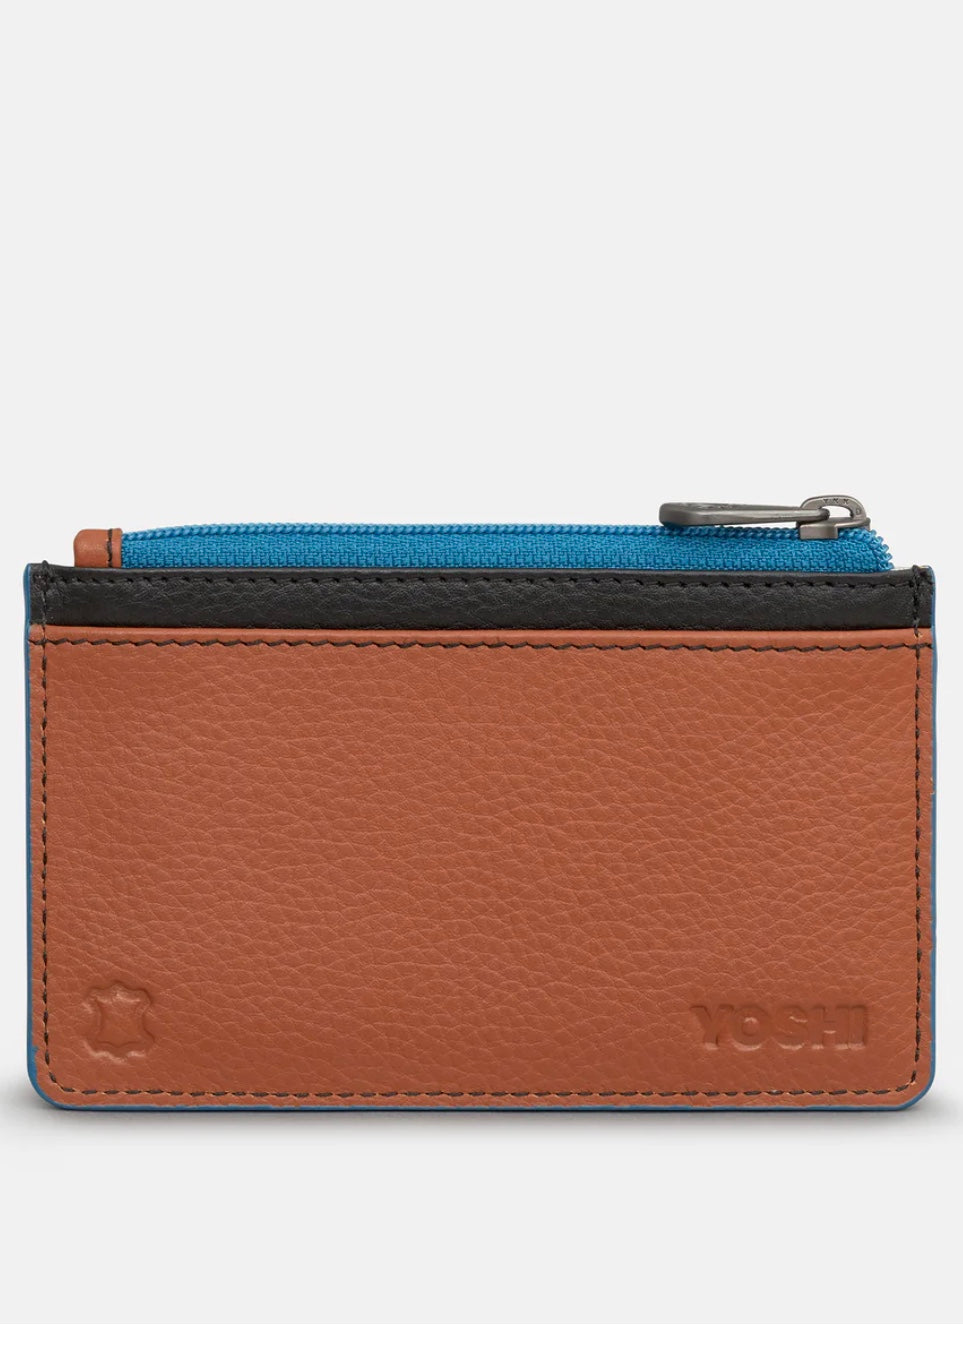 Yoshi Leather - Zip Top Card Holder / Rustic Colour Block